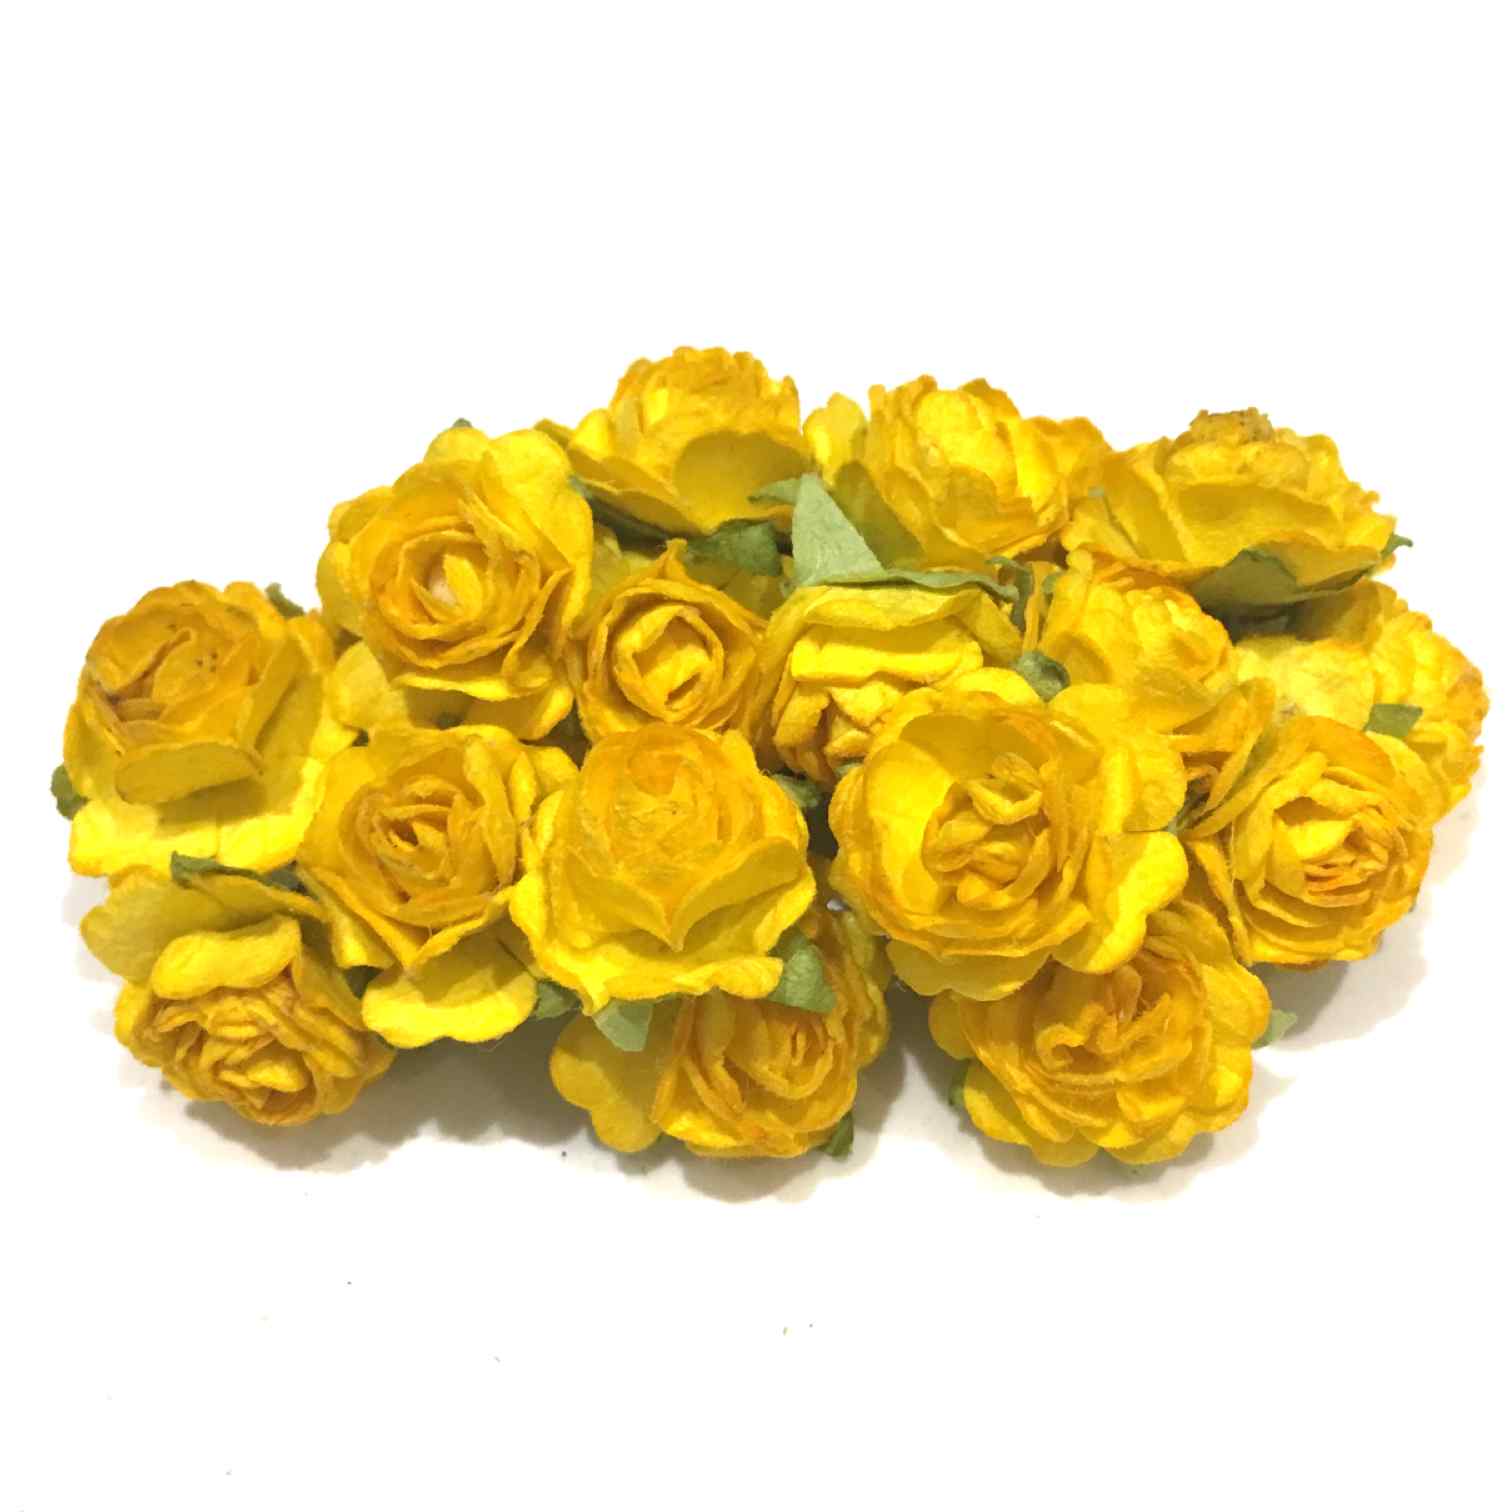 Deep Yellow Open Mulberry Paper Roses Or061